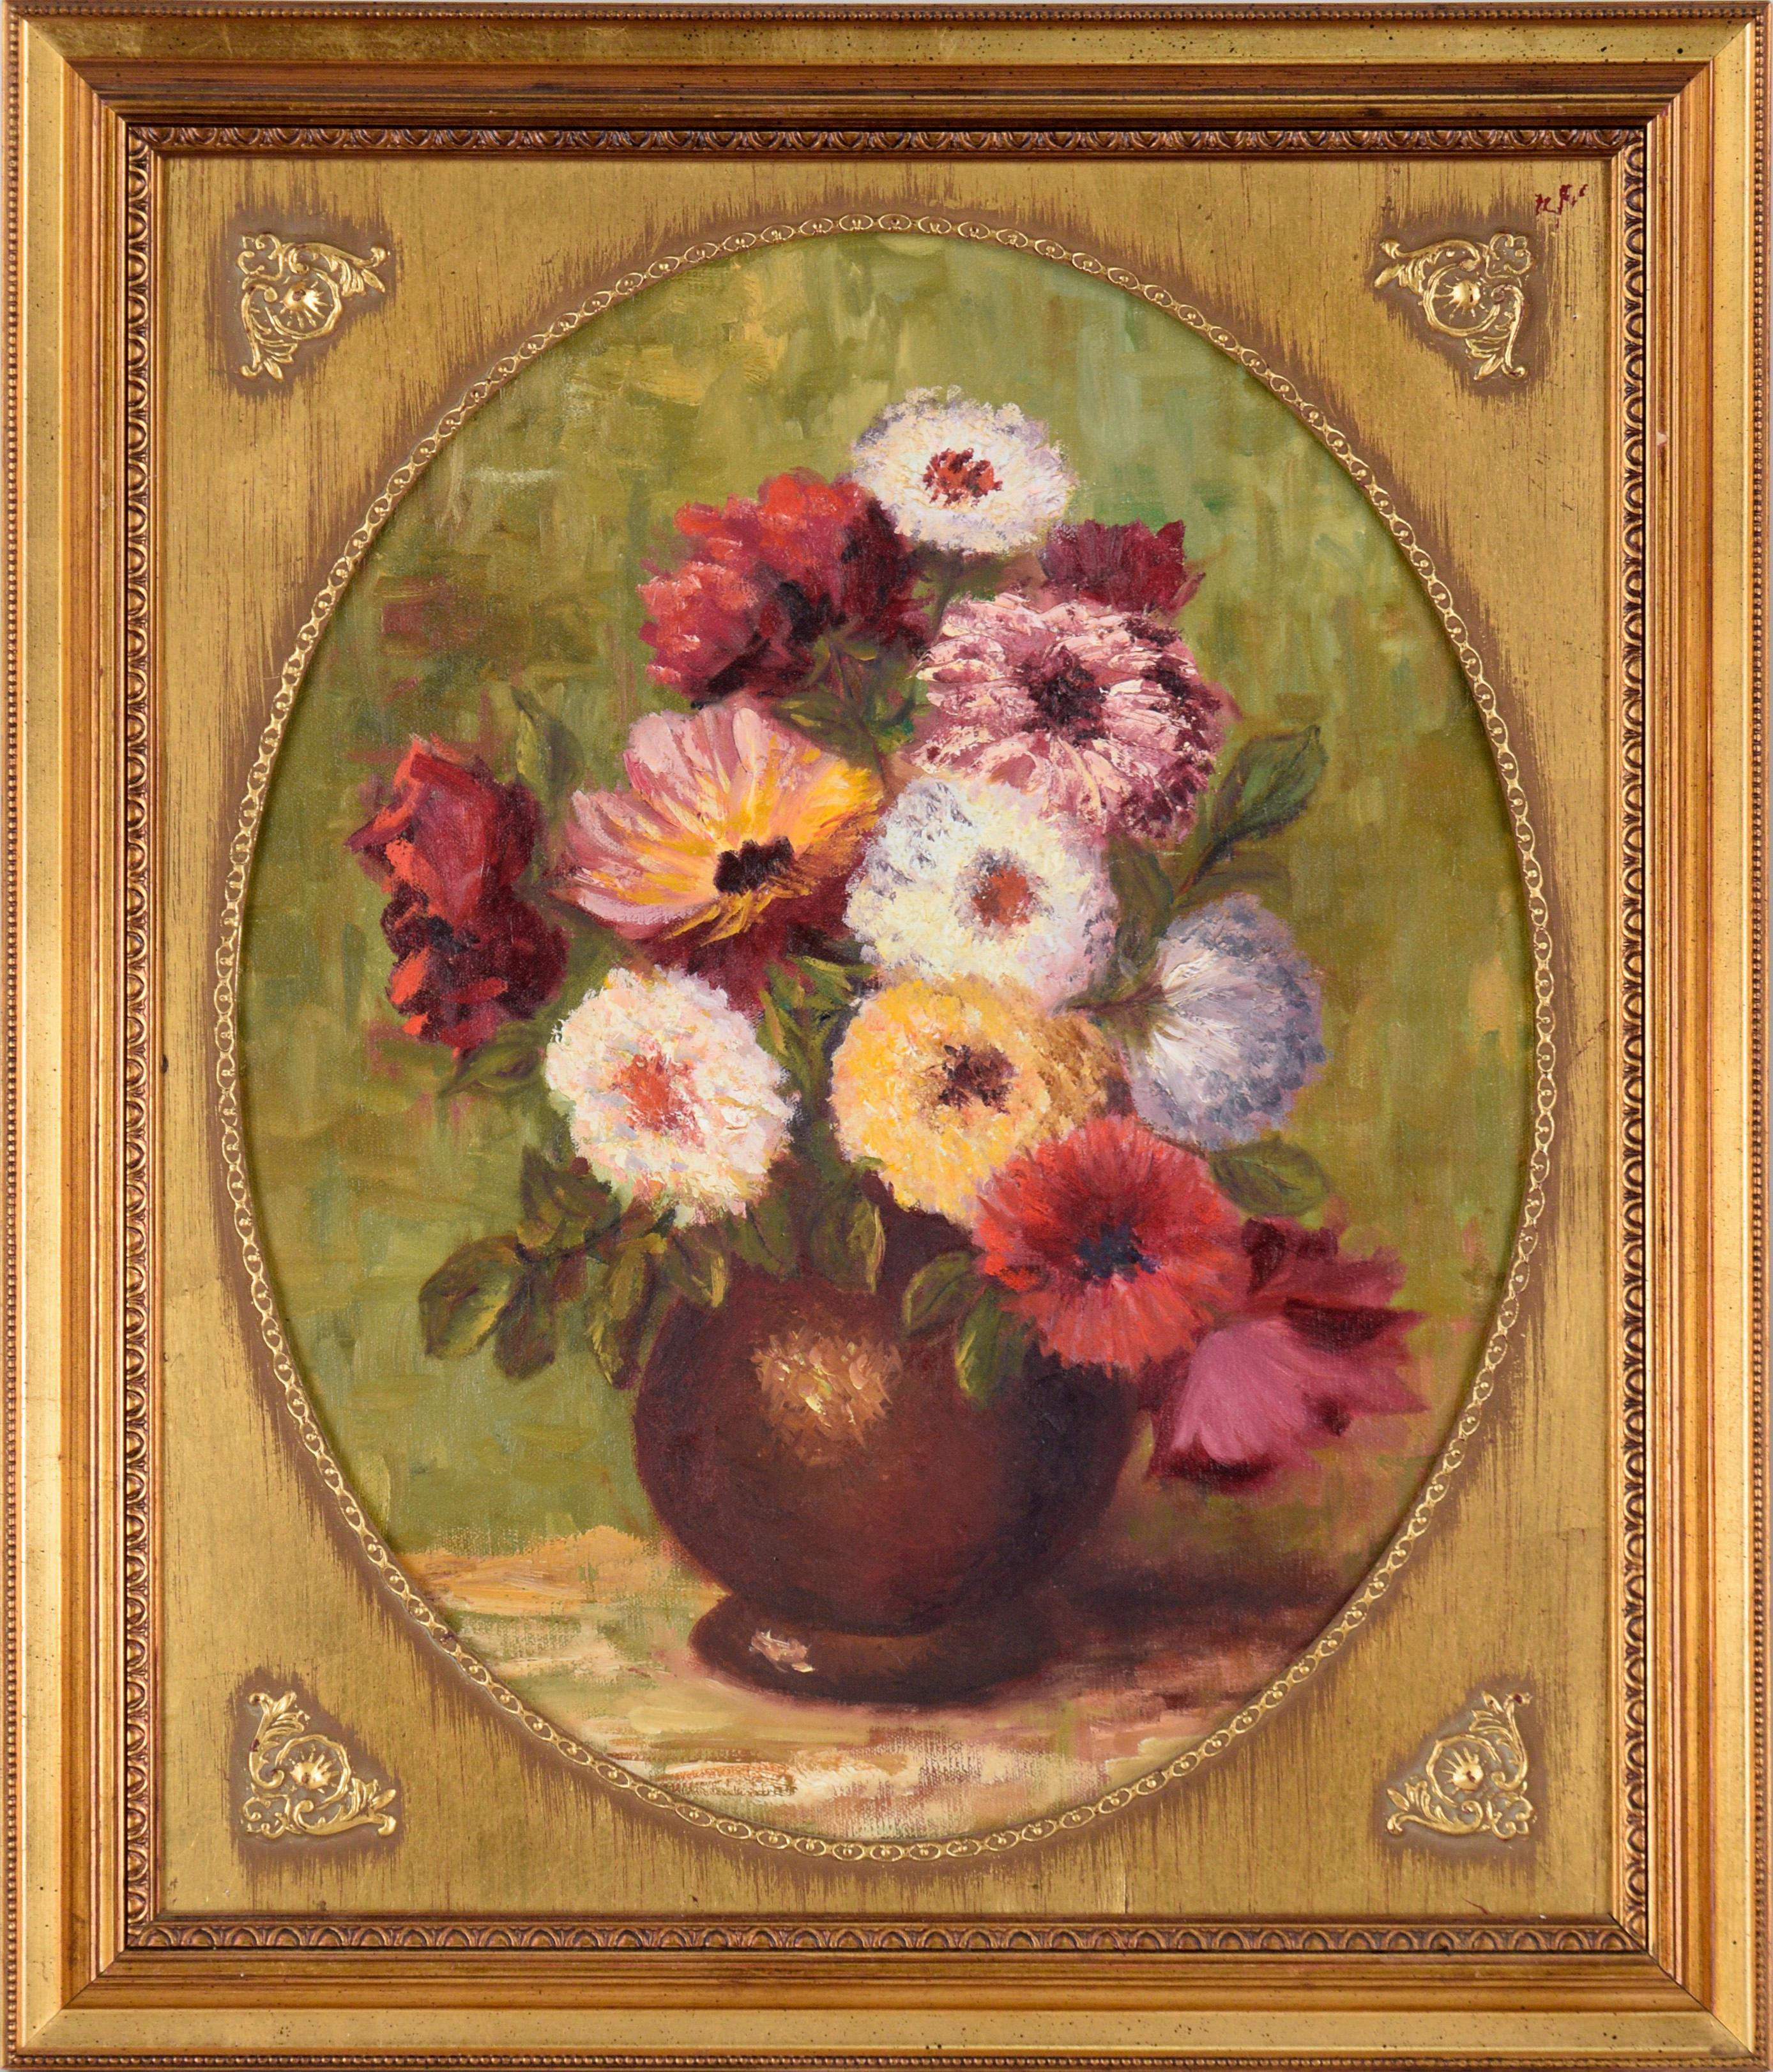 Unknown Interior Painting - Floral Still Life with Zinnias and Roses - Oil on Canvas